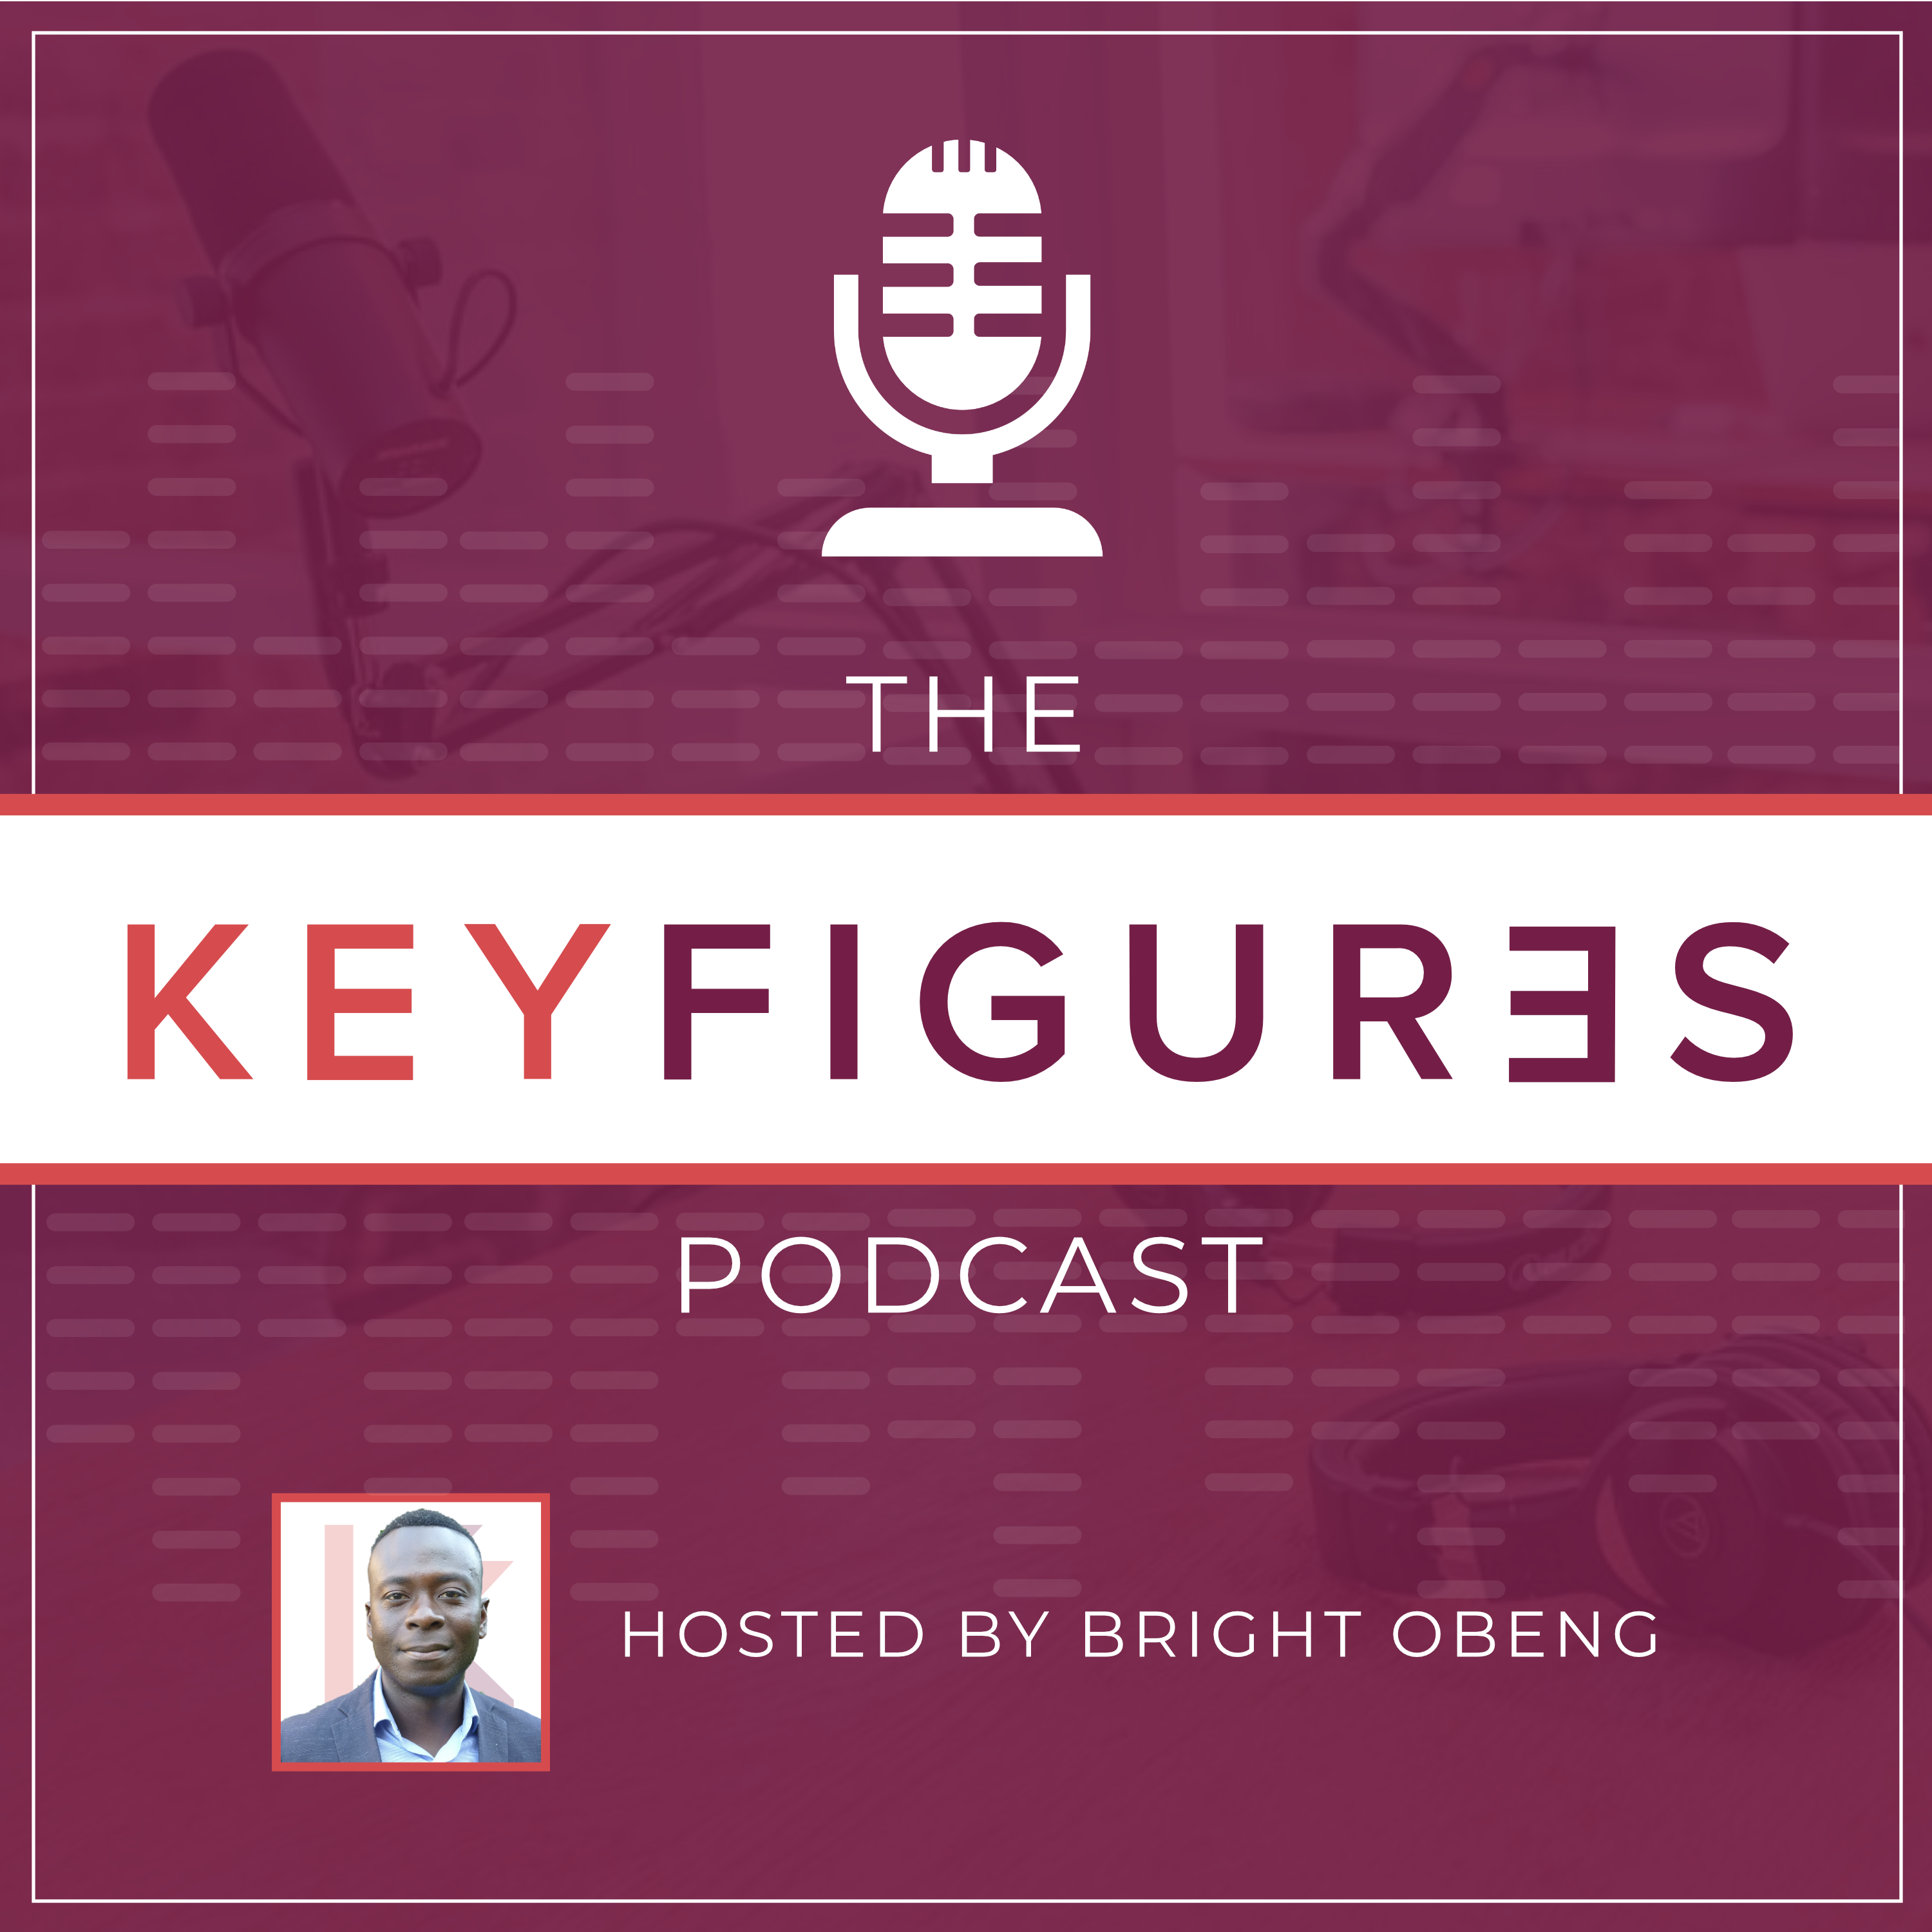 Artwork for podcast THE KEYFIGURES PODCAST